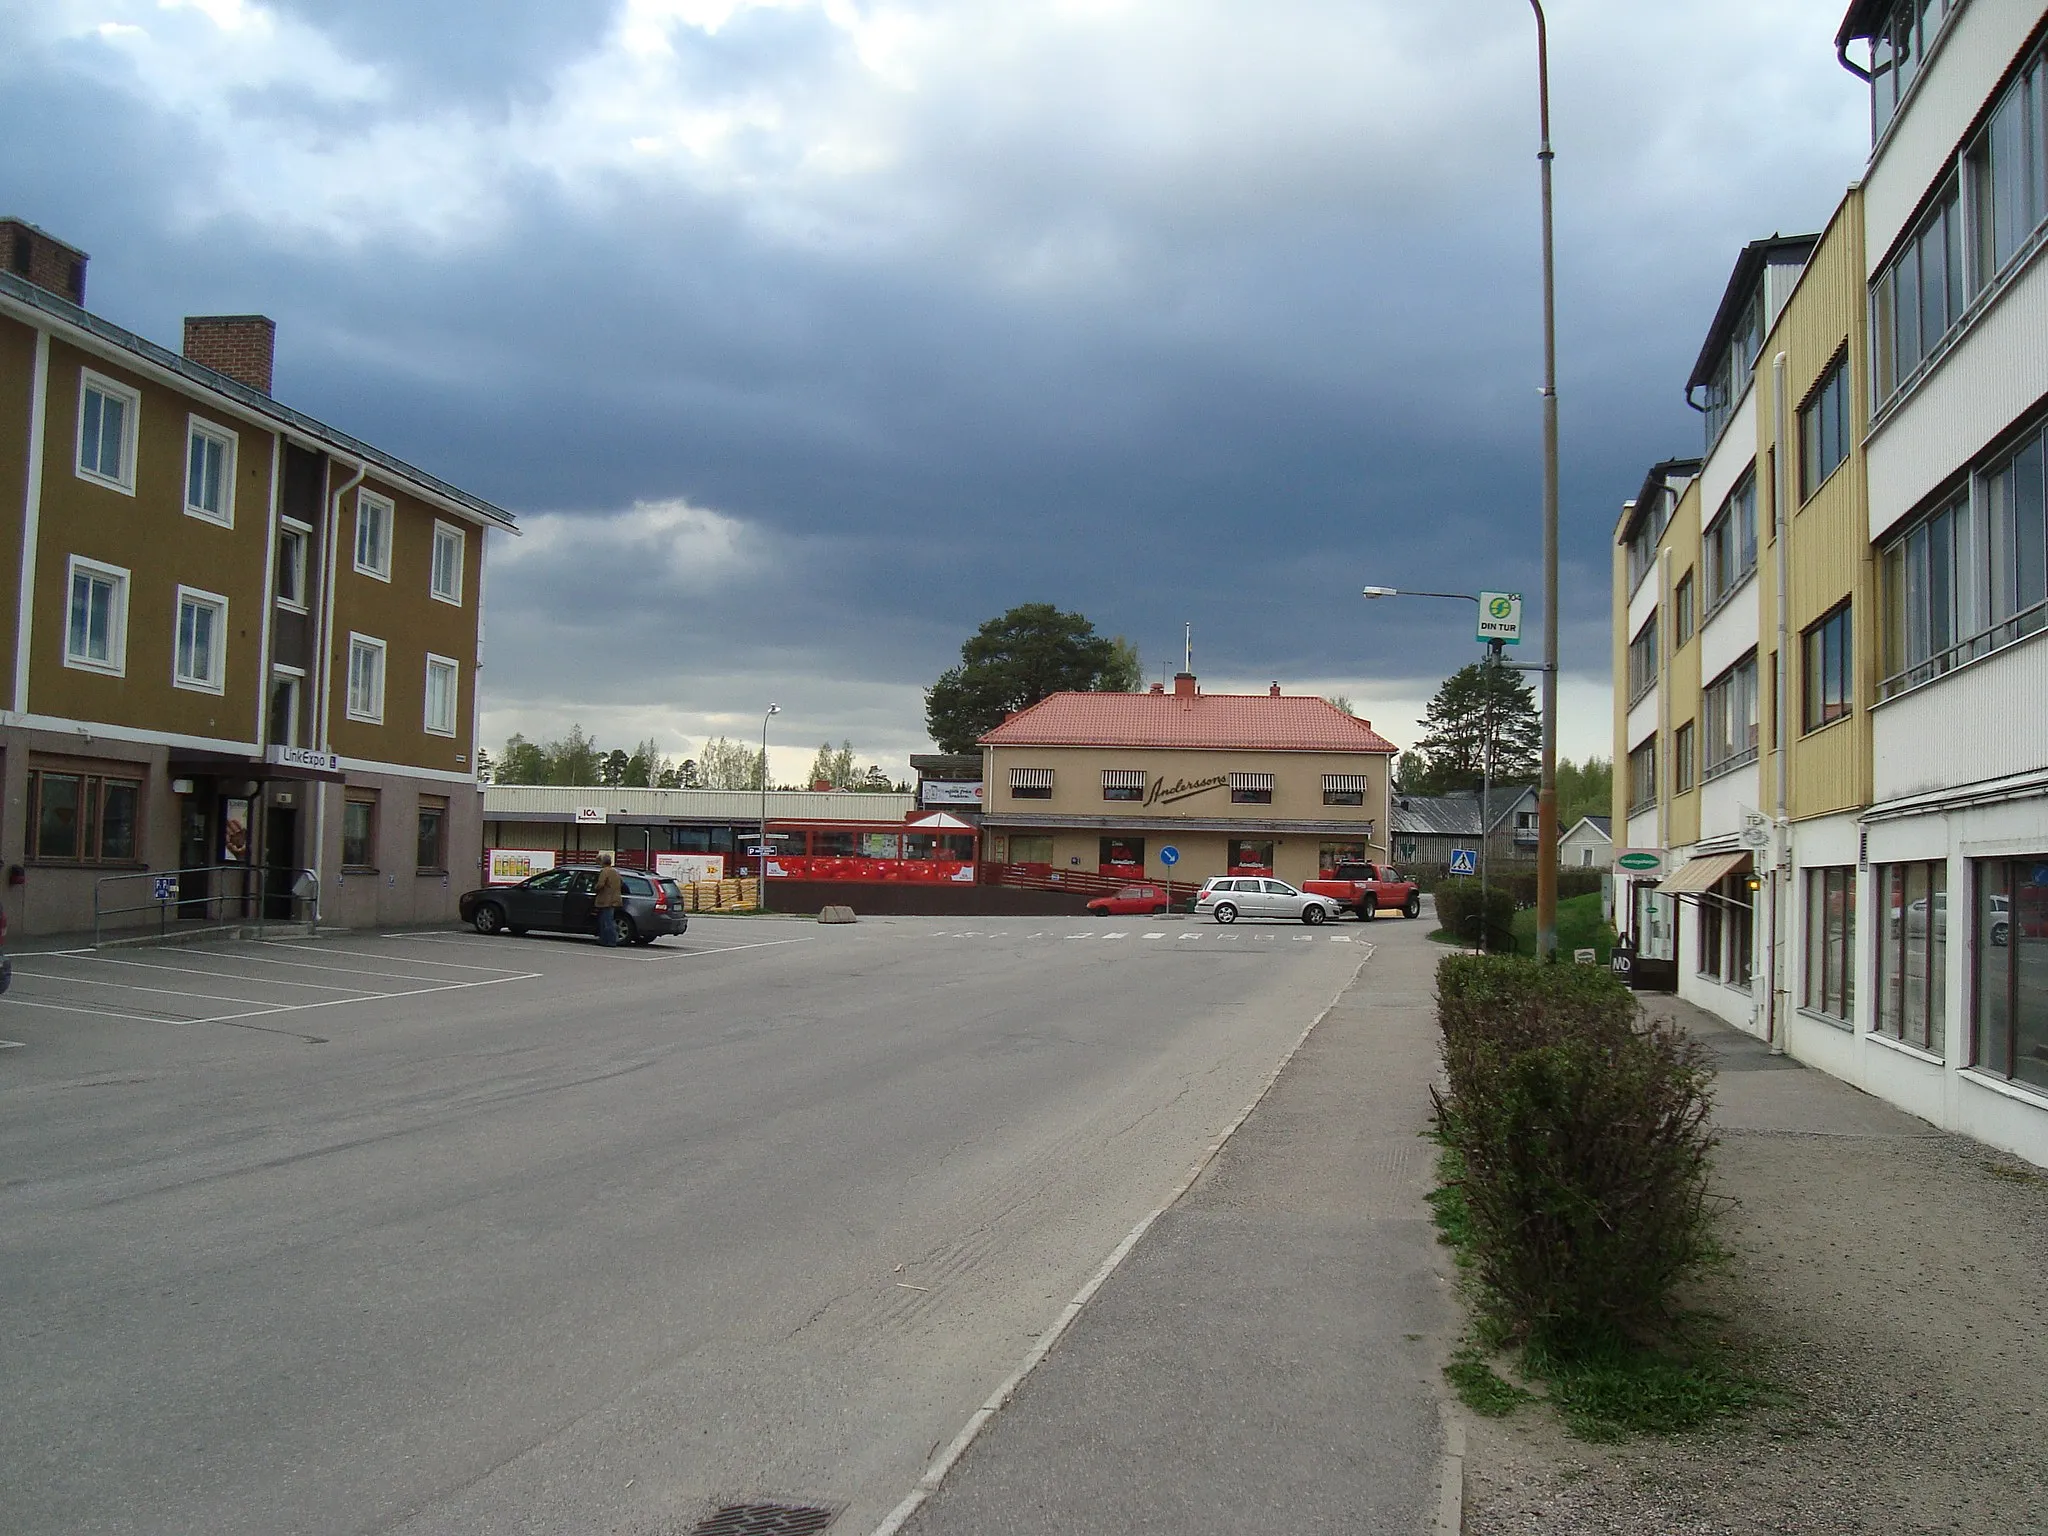 Photo showing: Sörberge, Sweden. A picture of a part of Sörberge town centre. Sörberge is a part of the town of Timrå. In the background you can see the grocery store ICA Anderssons.